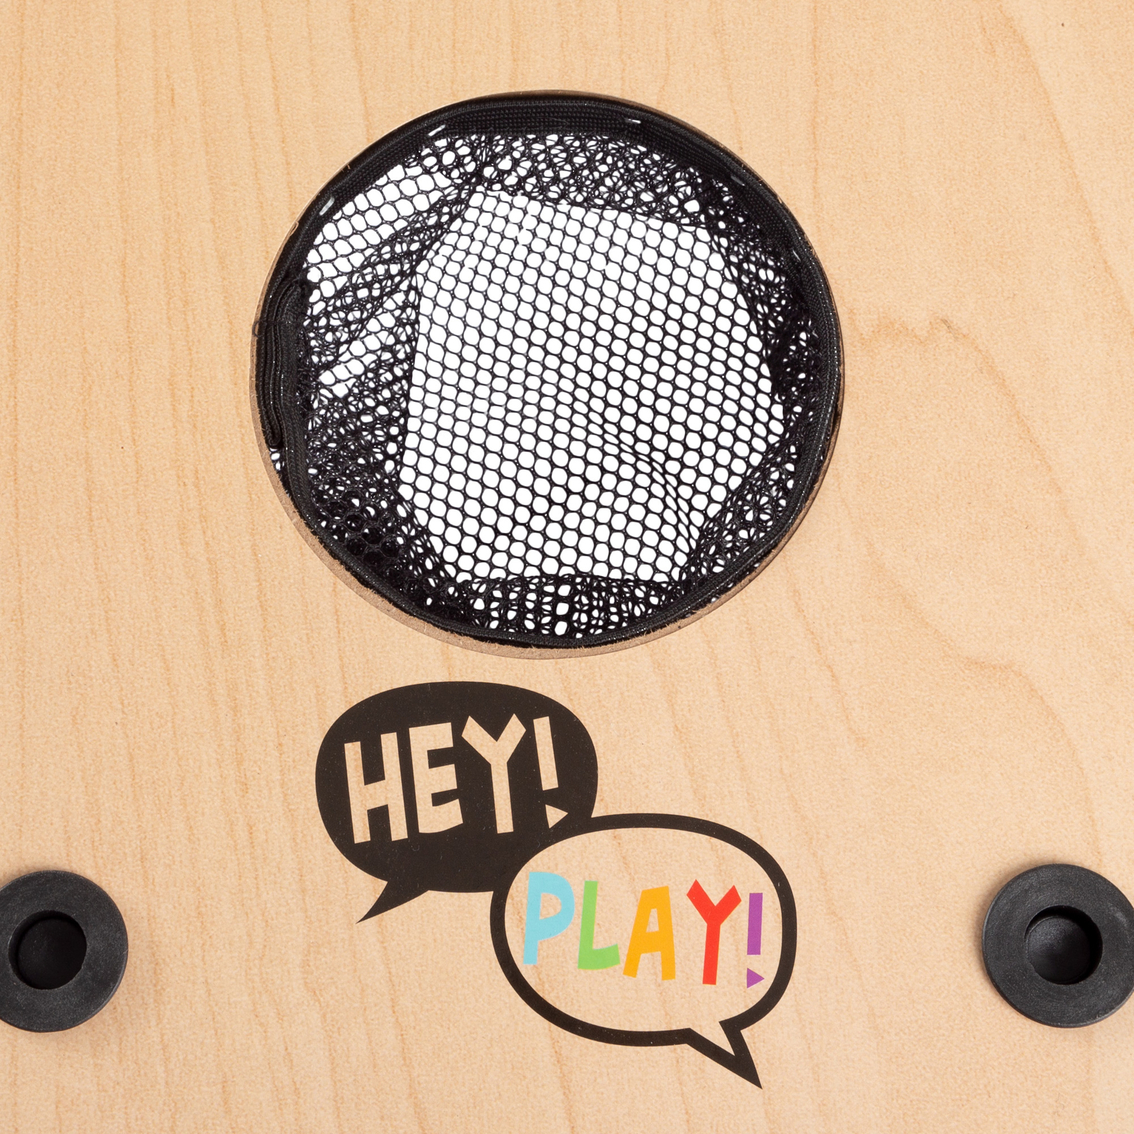 Hey! Play! 2 in 1 Washer Pitching and Beanbag Toss Game Set - Image 7 of 8